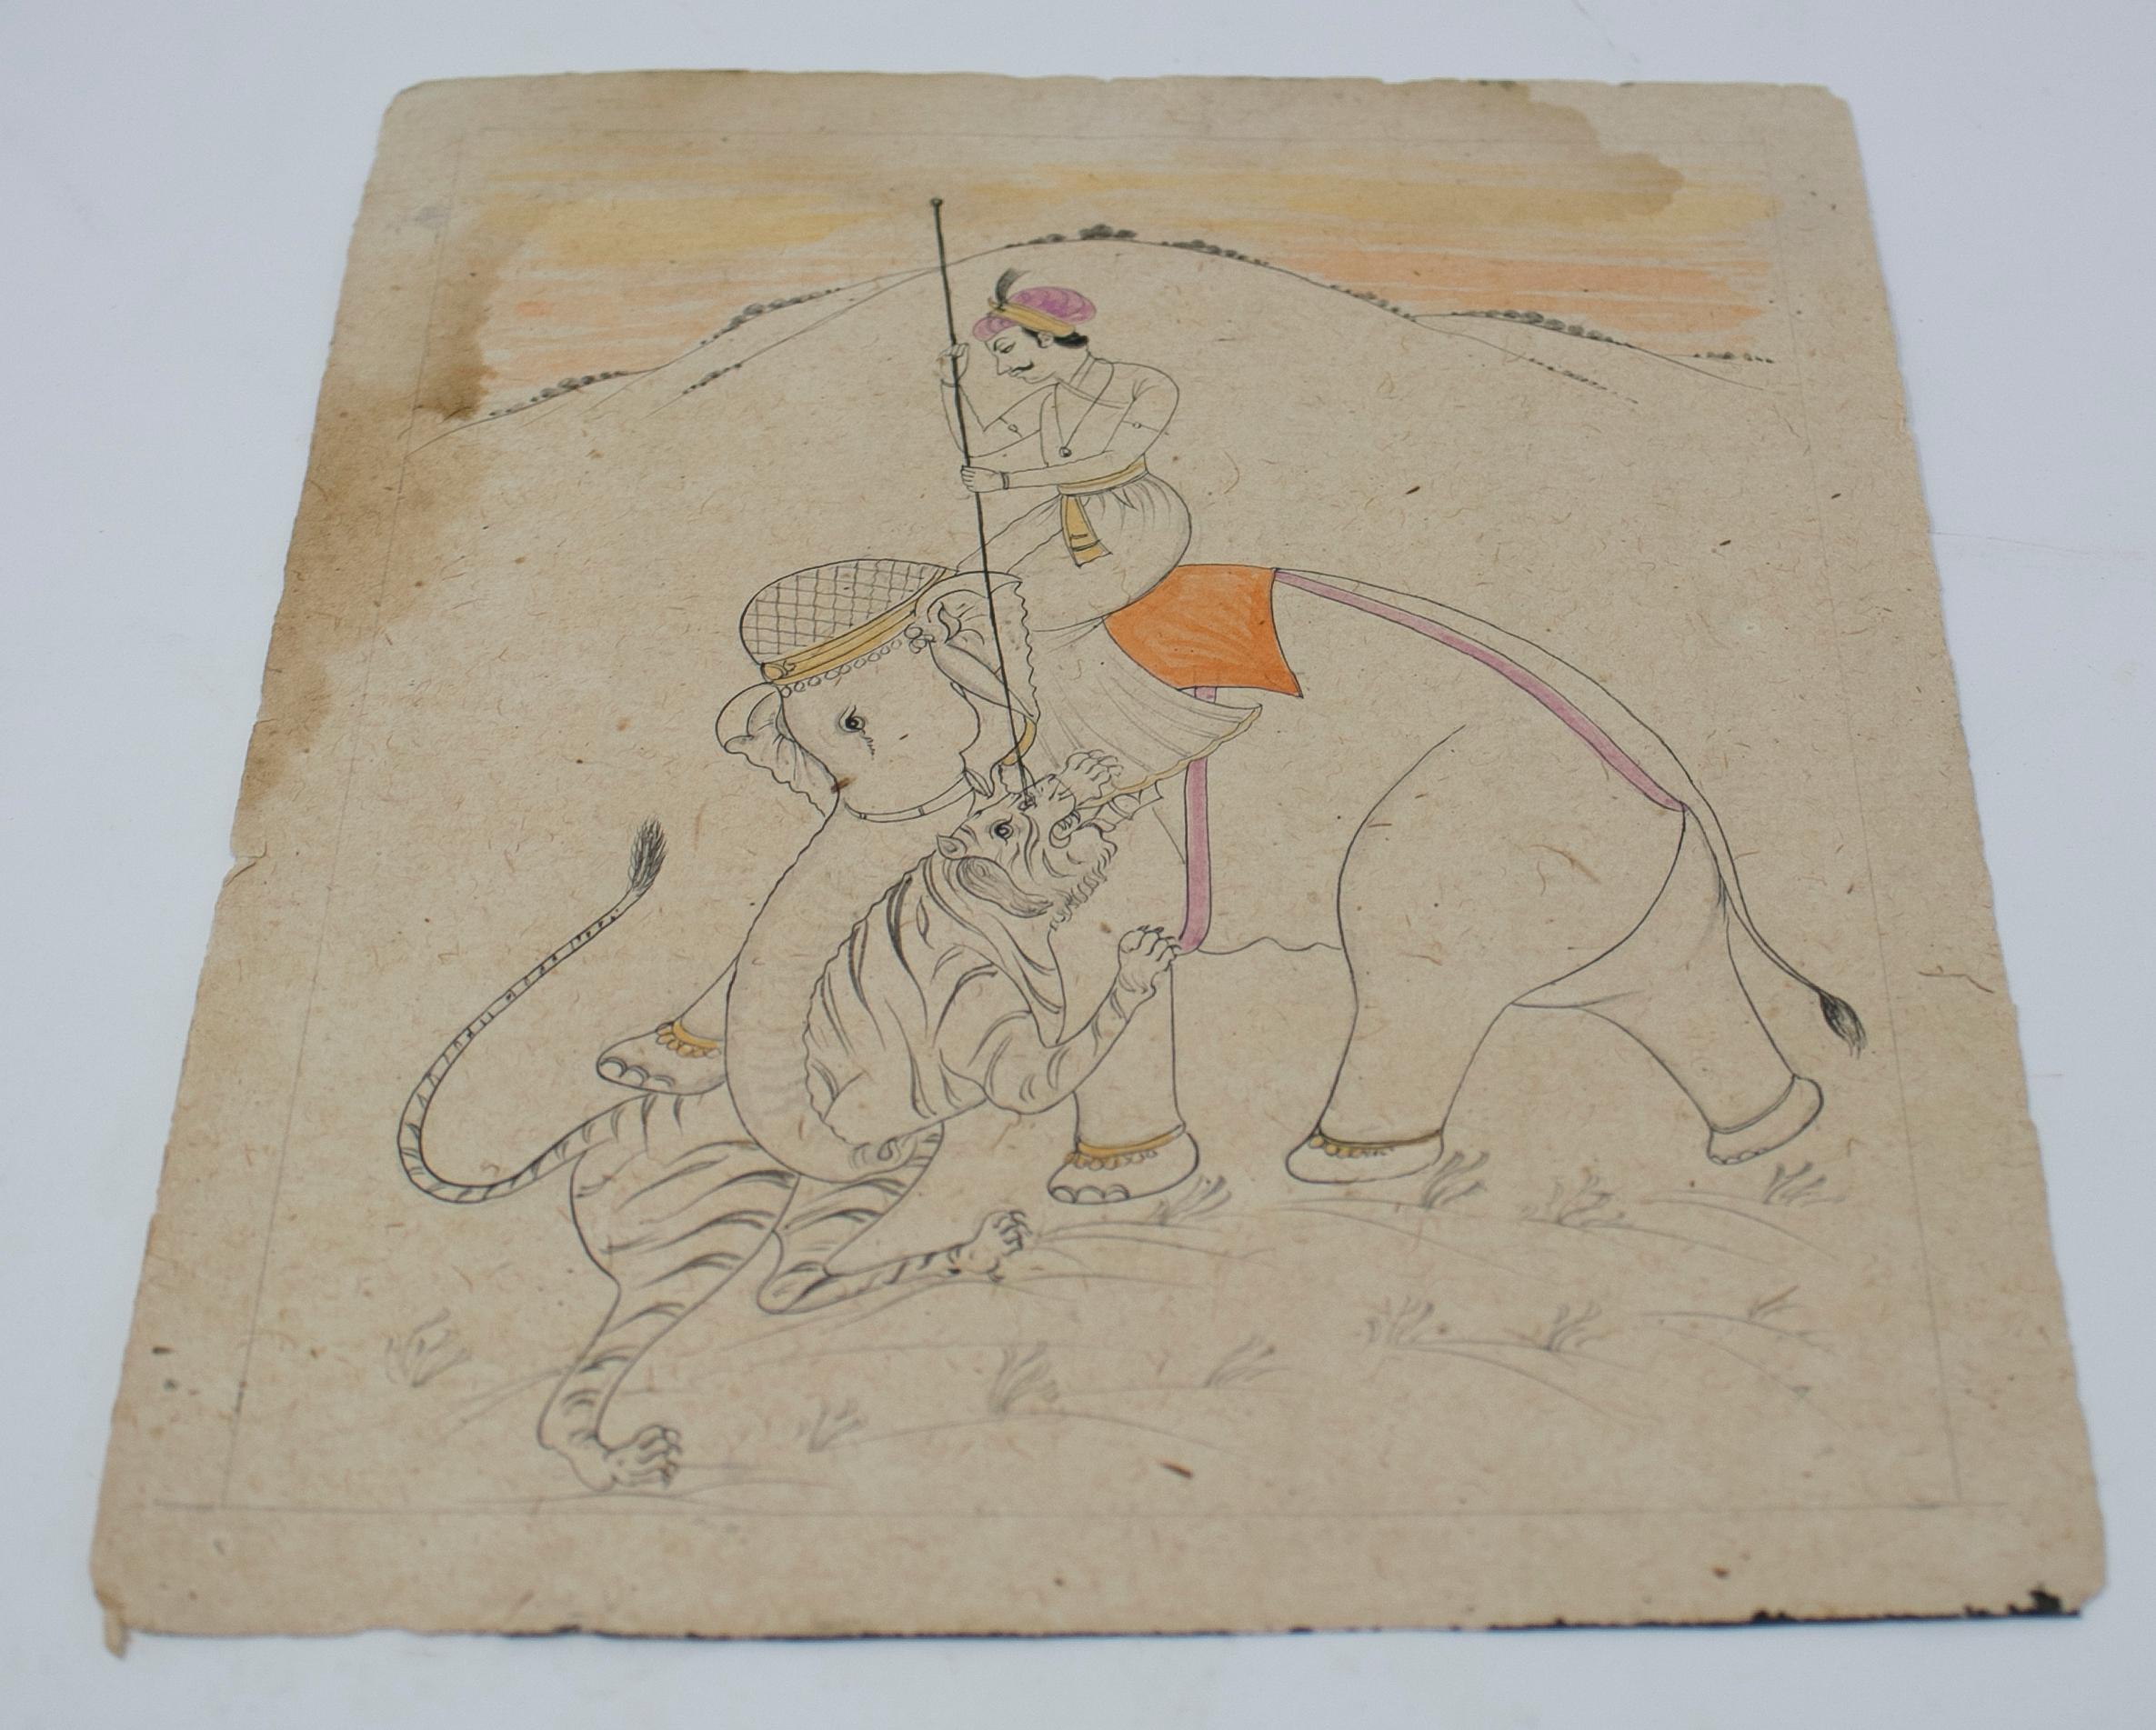 1970s Indian paper drawing of a man riding an elephant, part of a large private collection.

